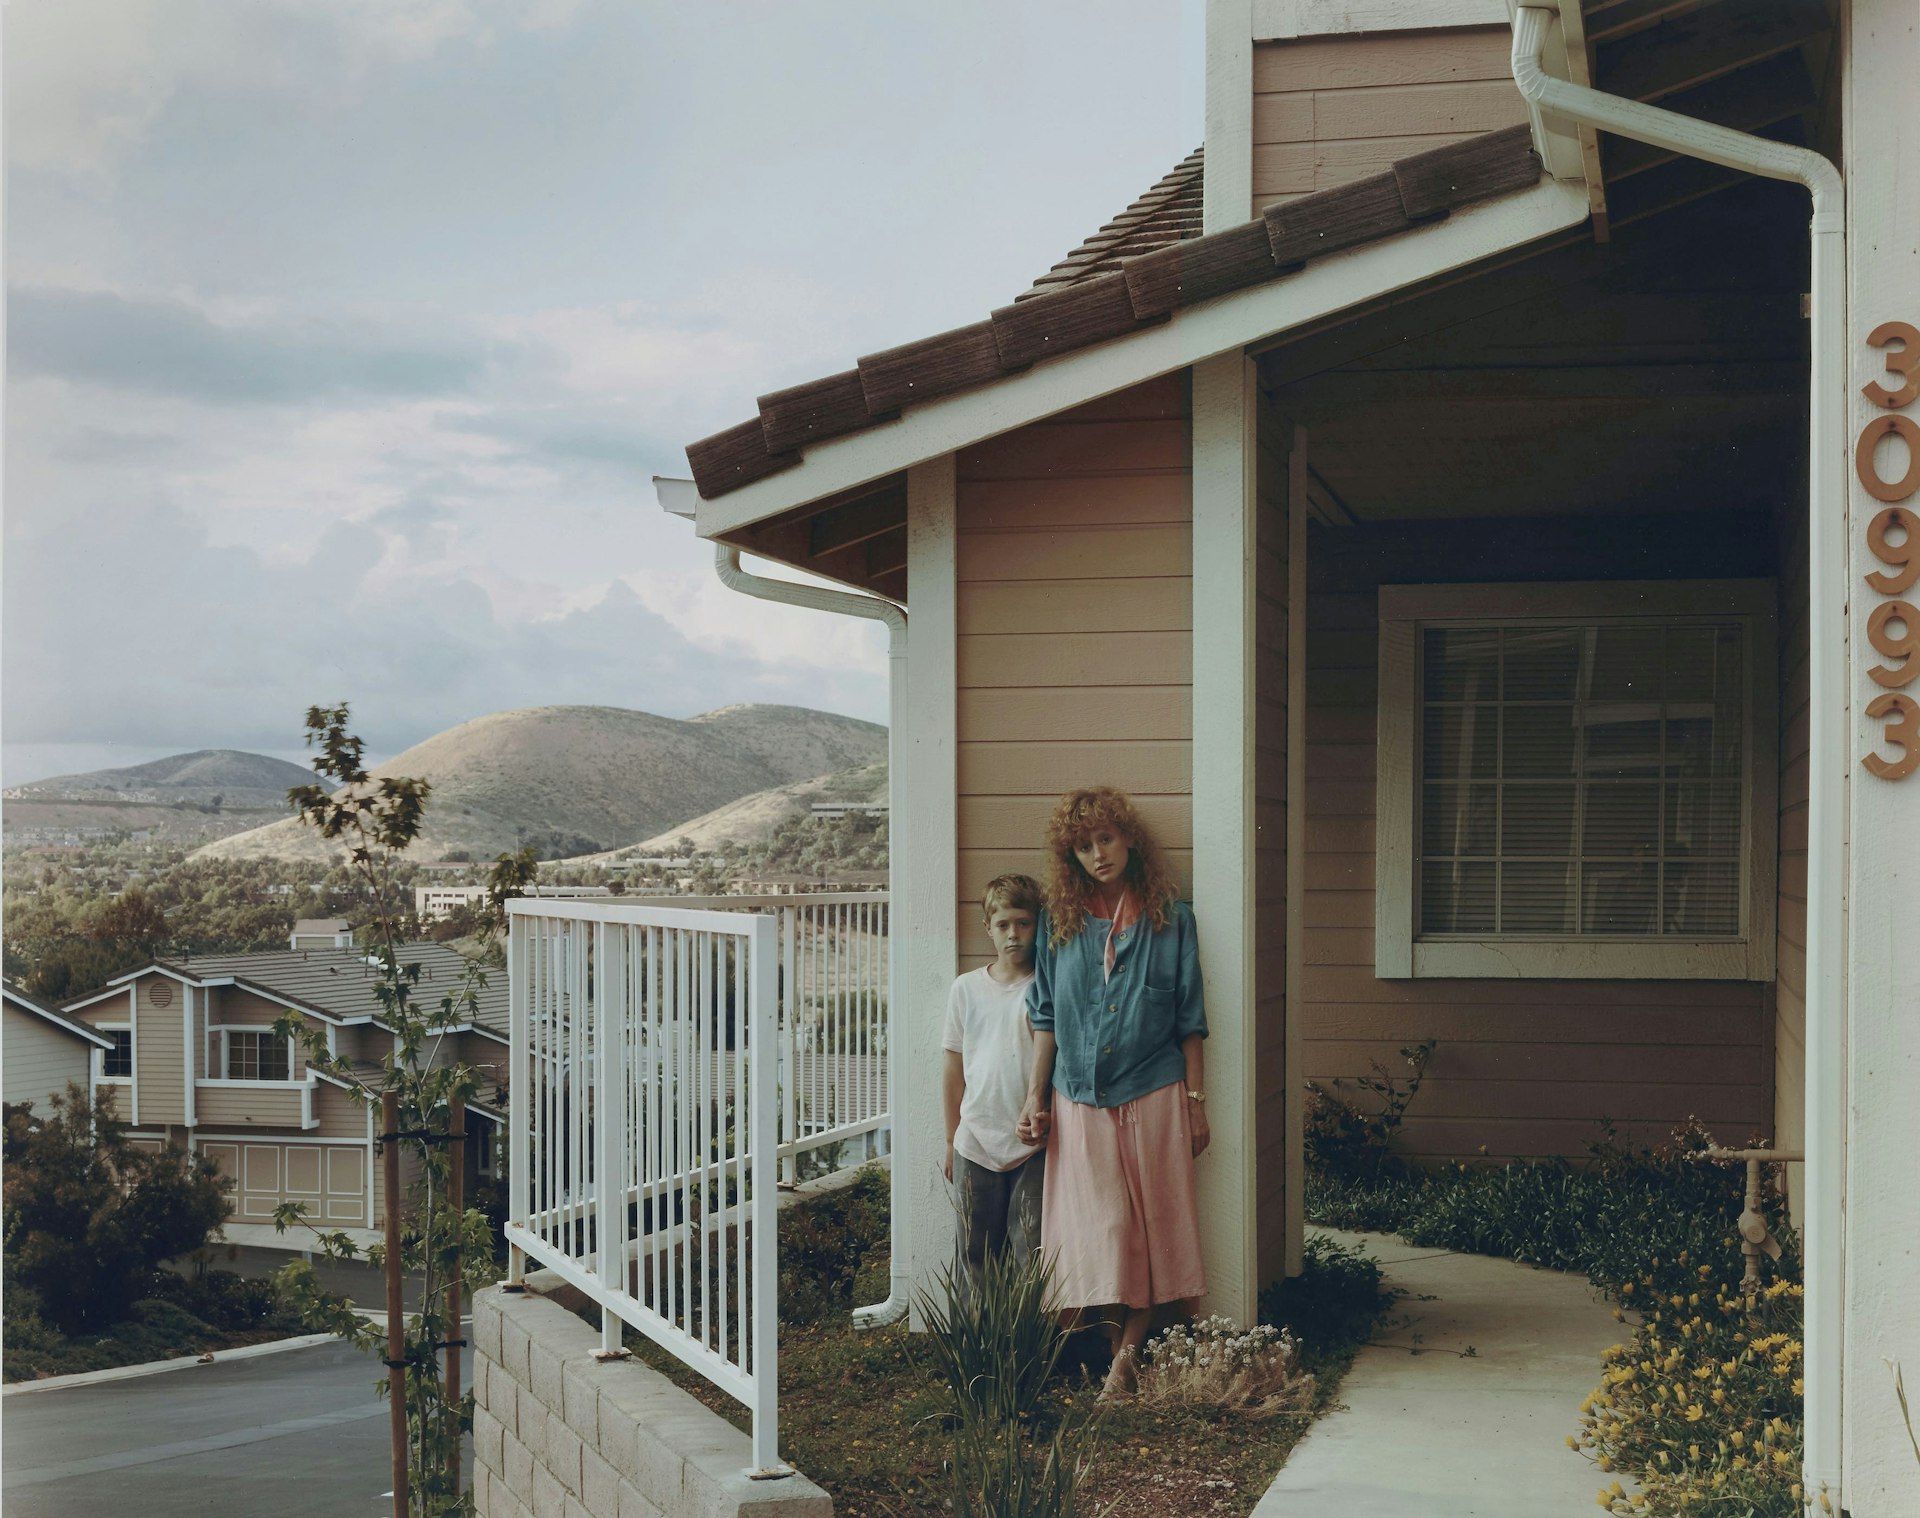 Agoura, California, February 1988 © Joel Sternfeld courtesy Luhring Augustine Gallery and Beetles + Huxley Gallery